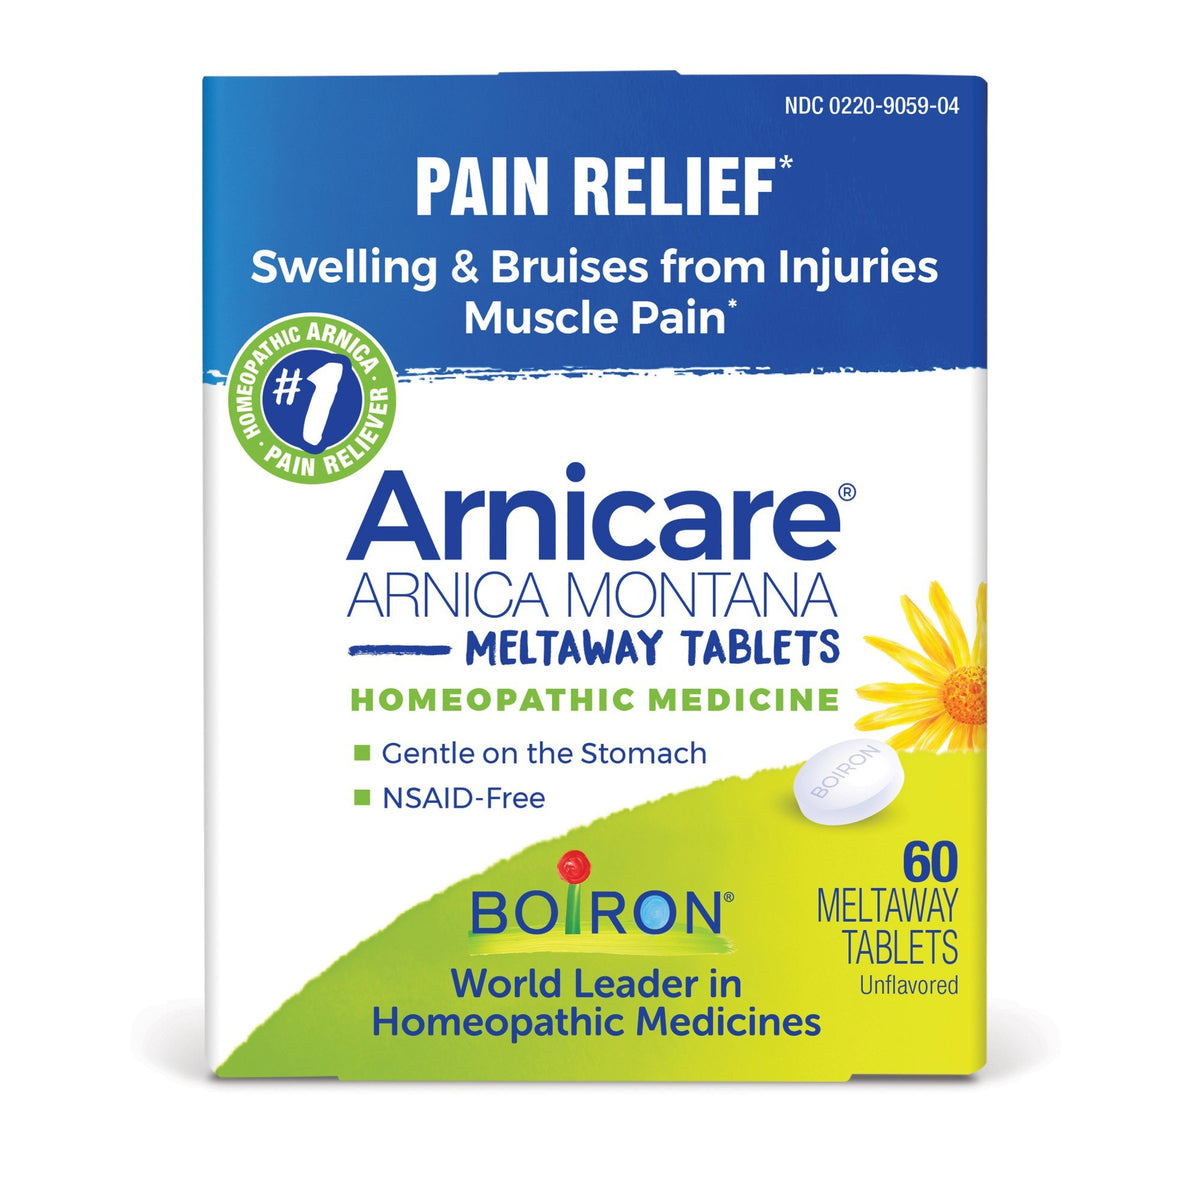 Boiron Arnicare Homeopathic Medicine For Pain Relief 60 Tablet